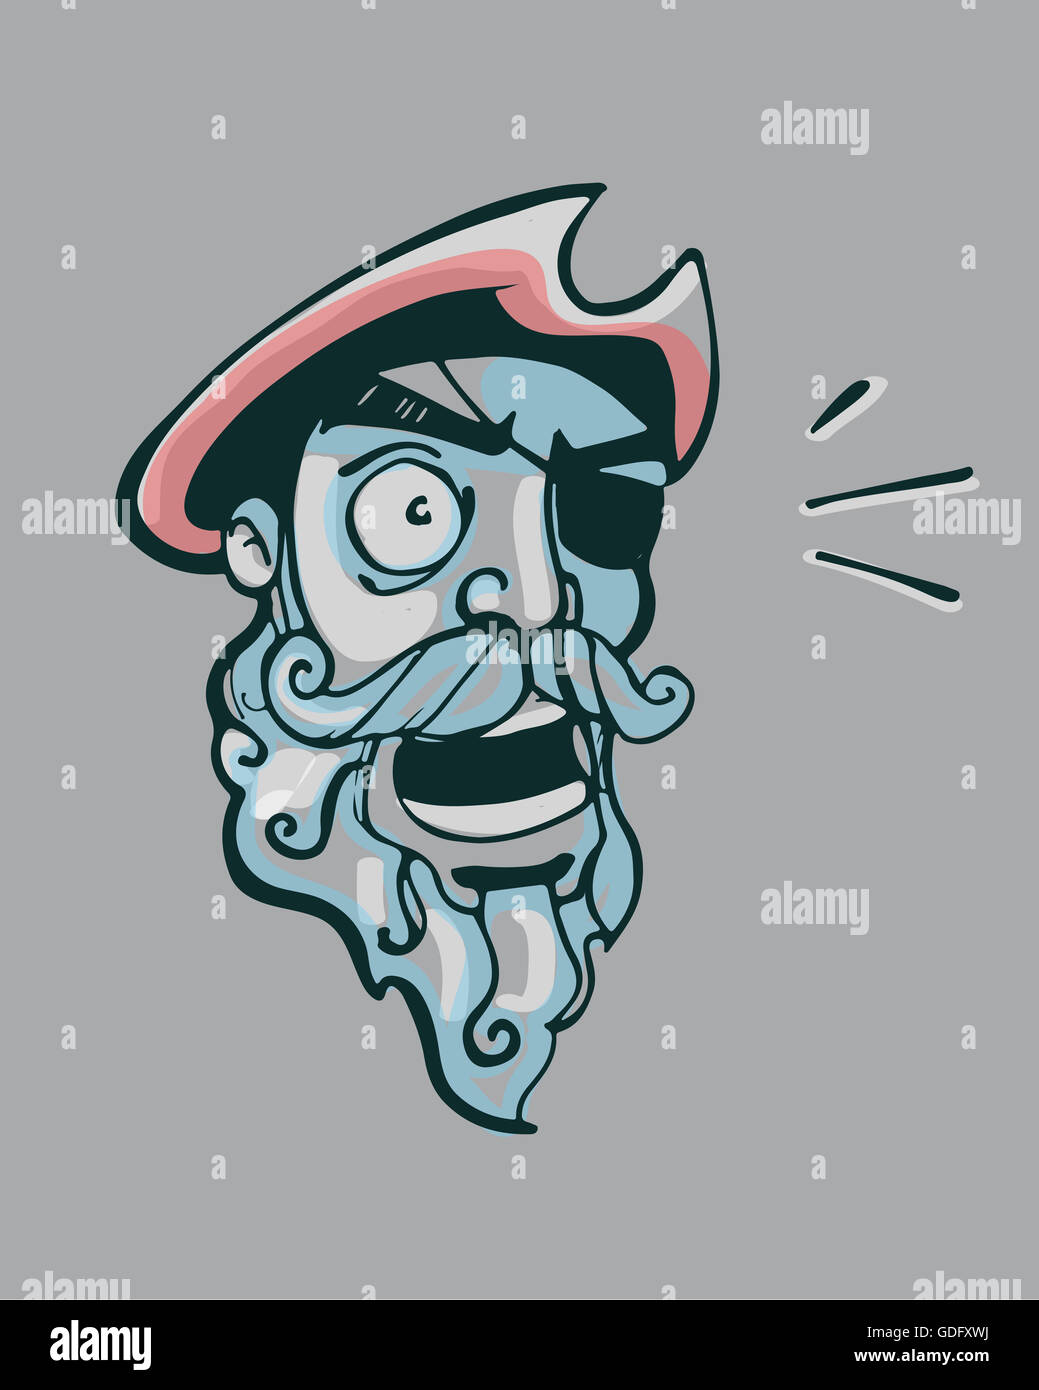 Hand drawn illustration or drawing of a pirate head Stock Photo